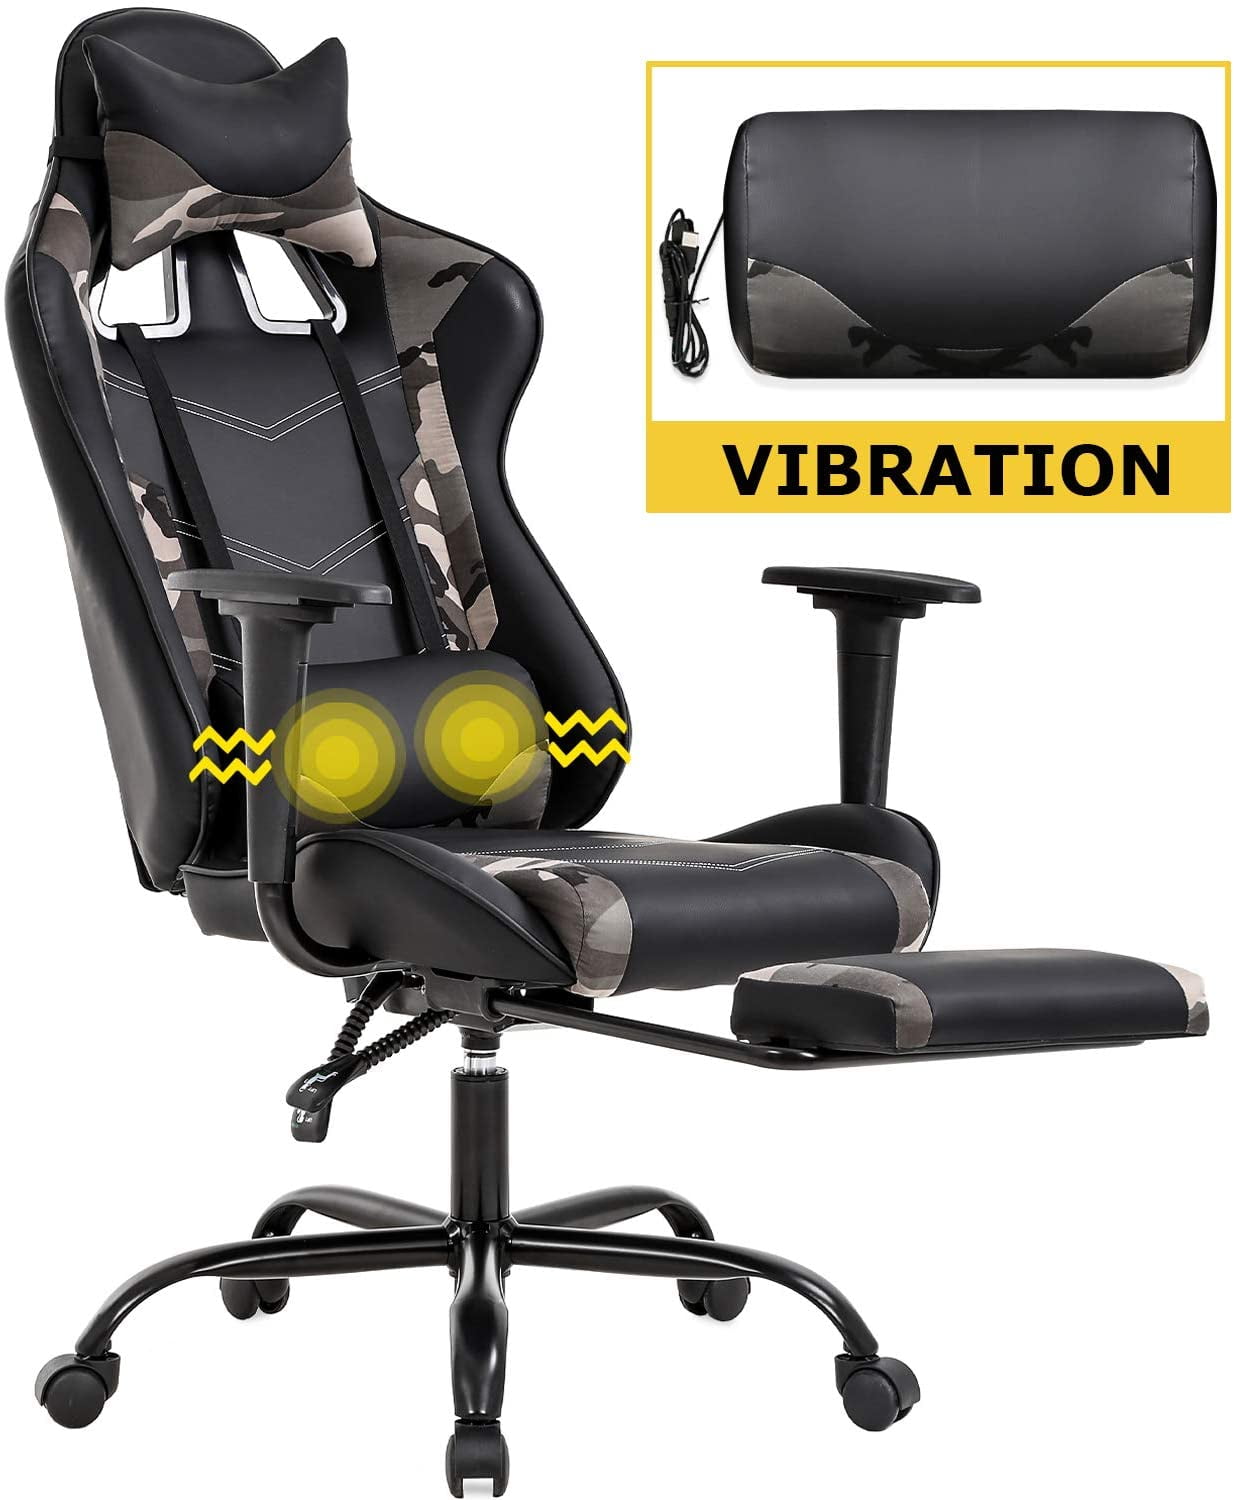 Orange Racing Style Ergonomic Chair PU Leather Desk Chair with Headrest and Massage Lumbar Support EDWELL Gaming Chair Office Chair with Footrest,High Back Computer Gaming Chair